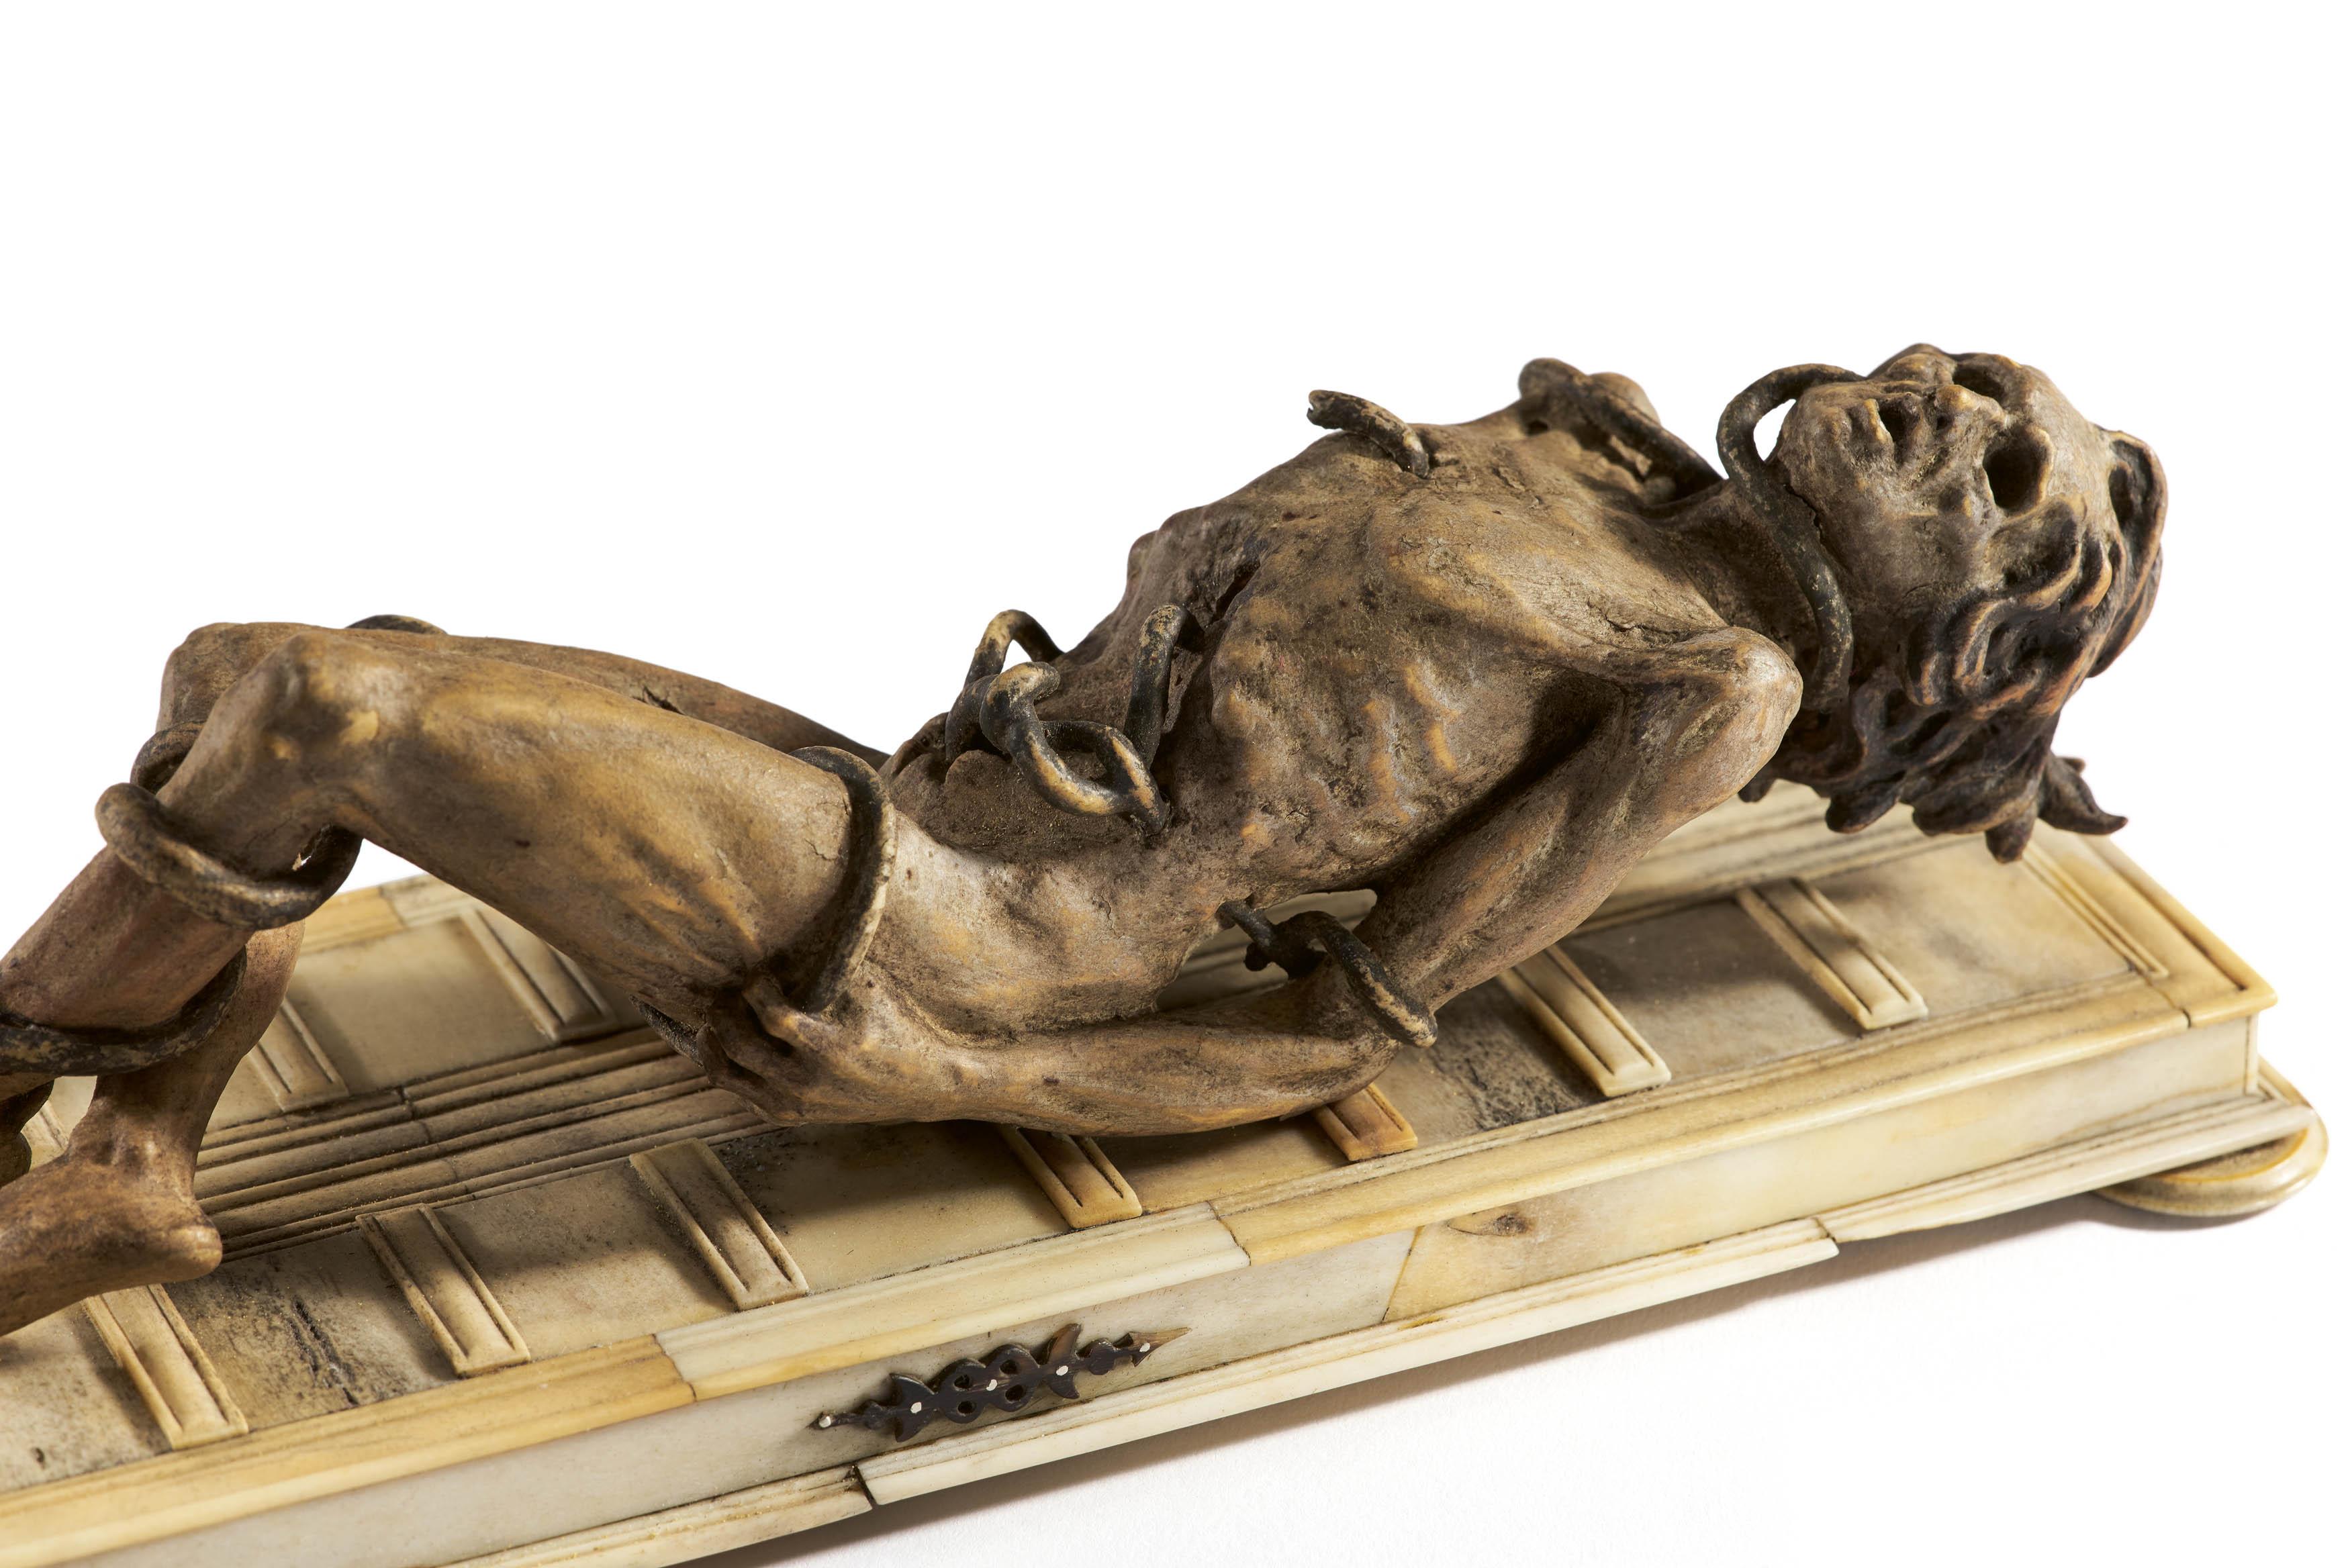 DRAMATIC PORTRAYAL OF A TORMENTED IN DEATH WITH CASKET - Image 2 of 11